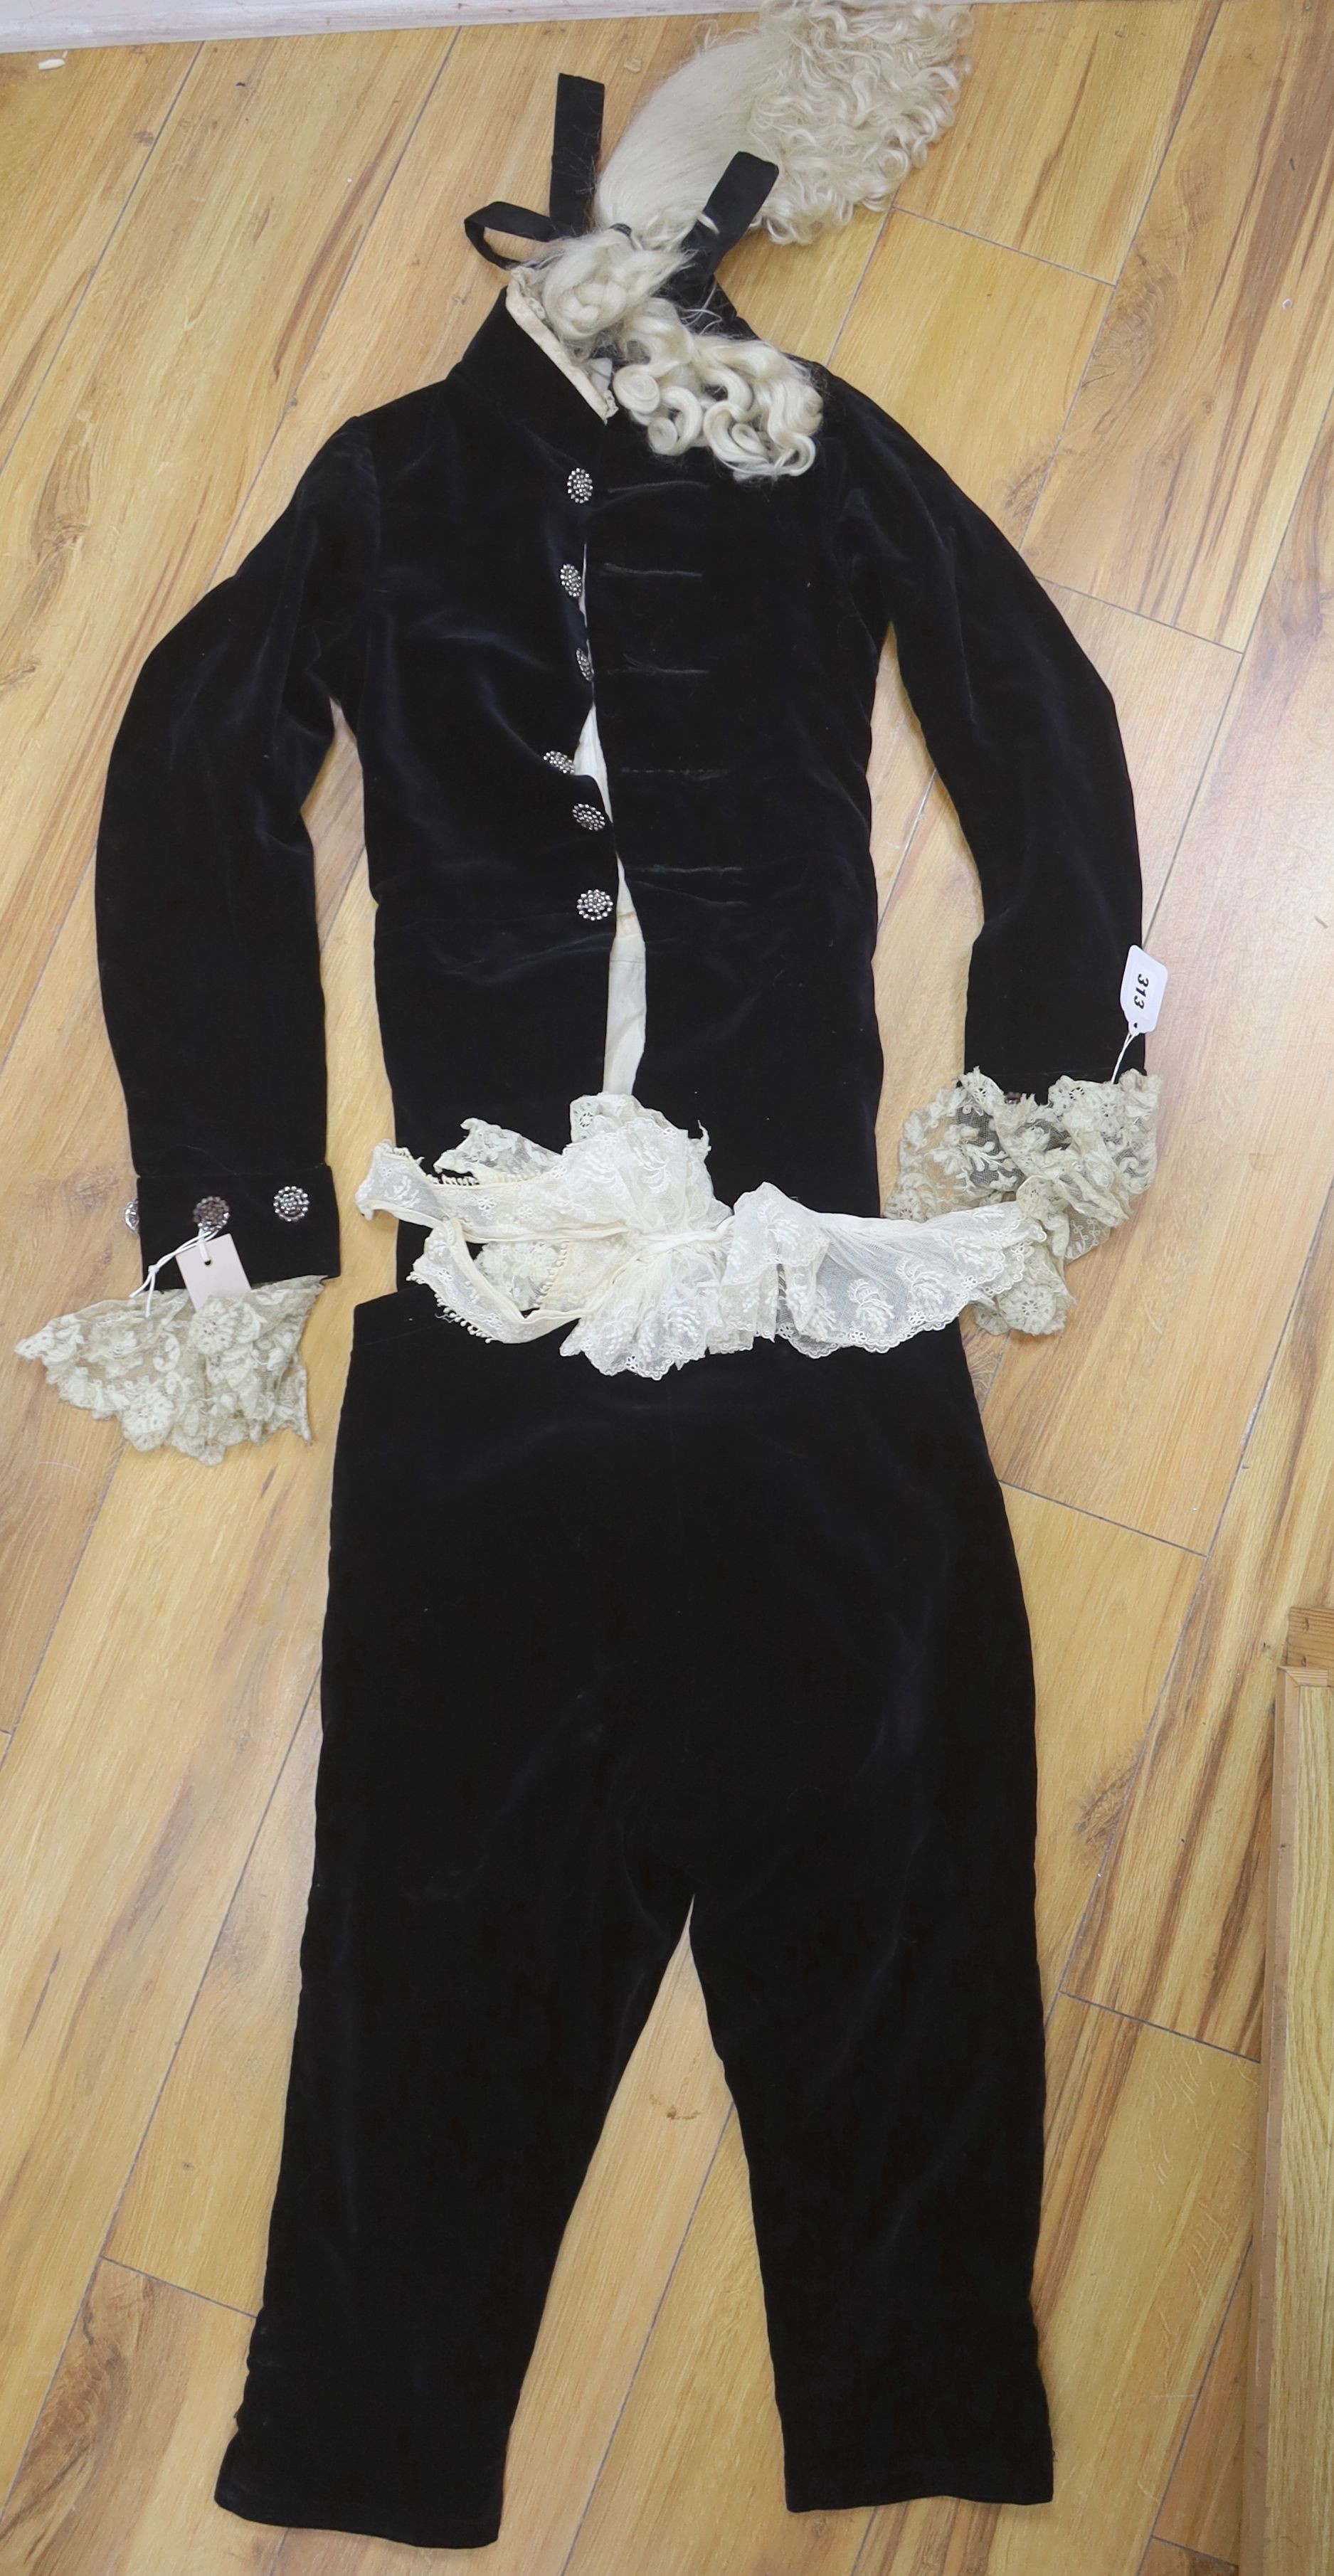 A 19th century black velvet page boys outfit with wig and lace collar, jacket - 84cm